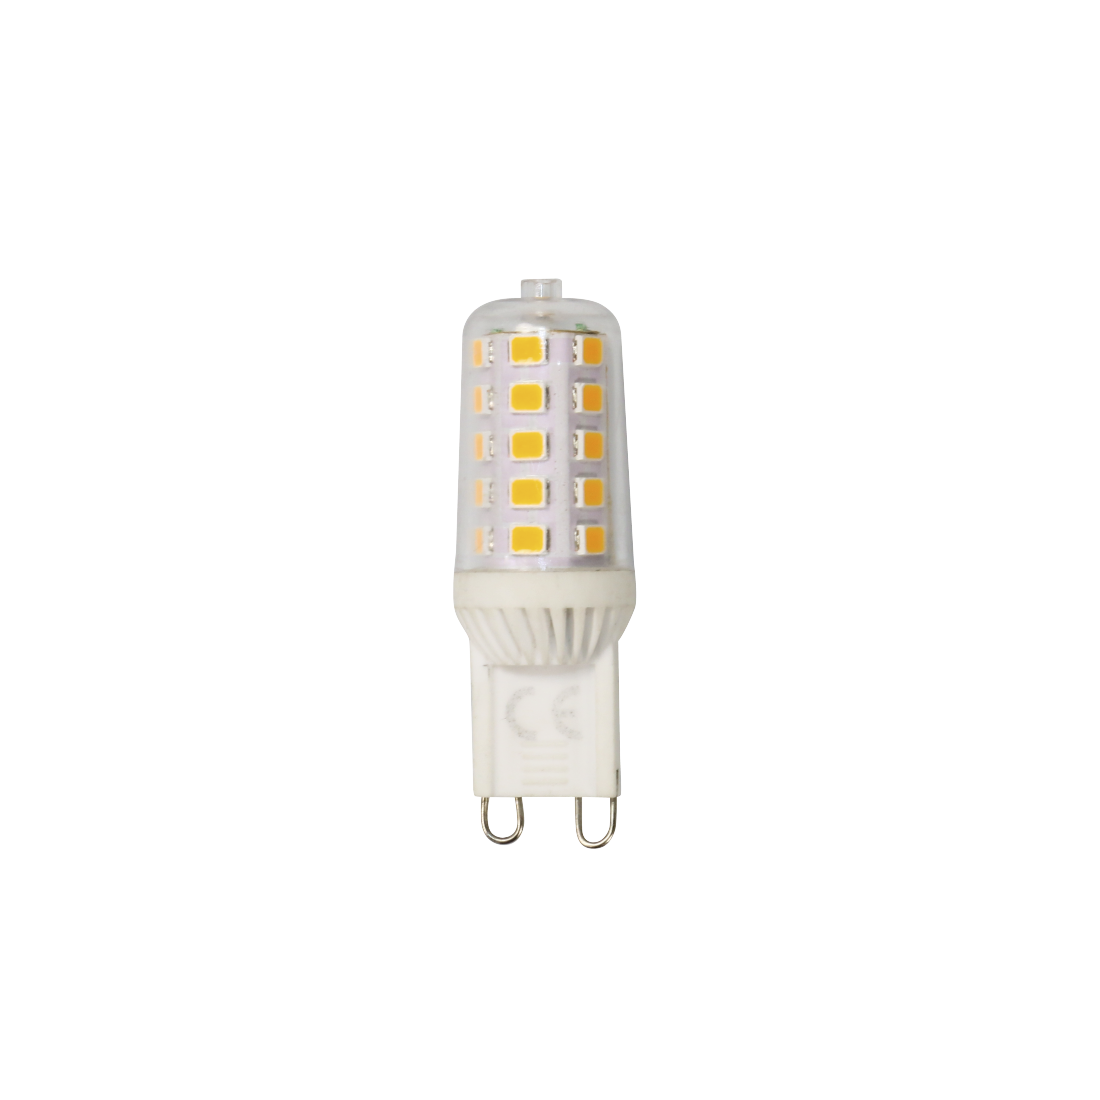 abx High-Res Image - Xavax, LED Bulb, G9, 370 lm, Replaces 33 W, Capsule, warm white